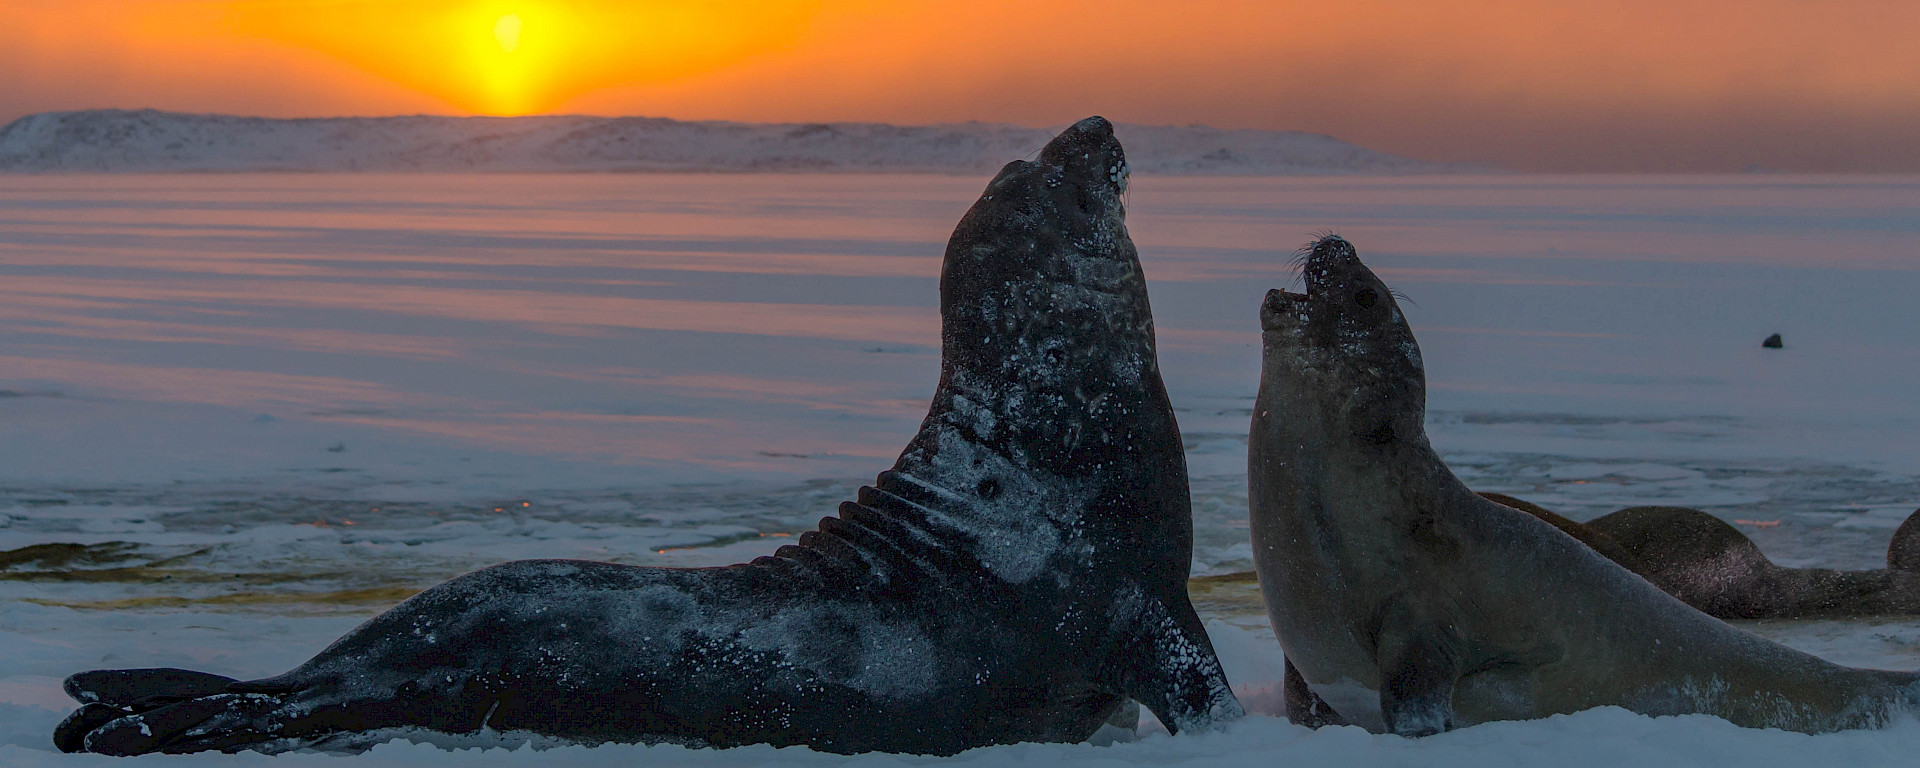 Two elephant seals with a sunset backdrop.